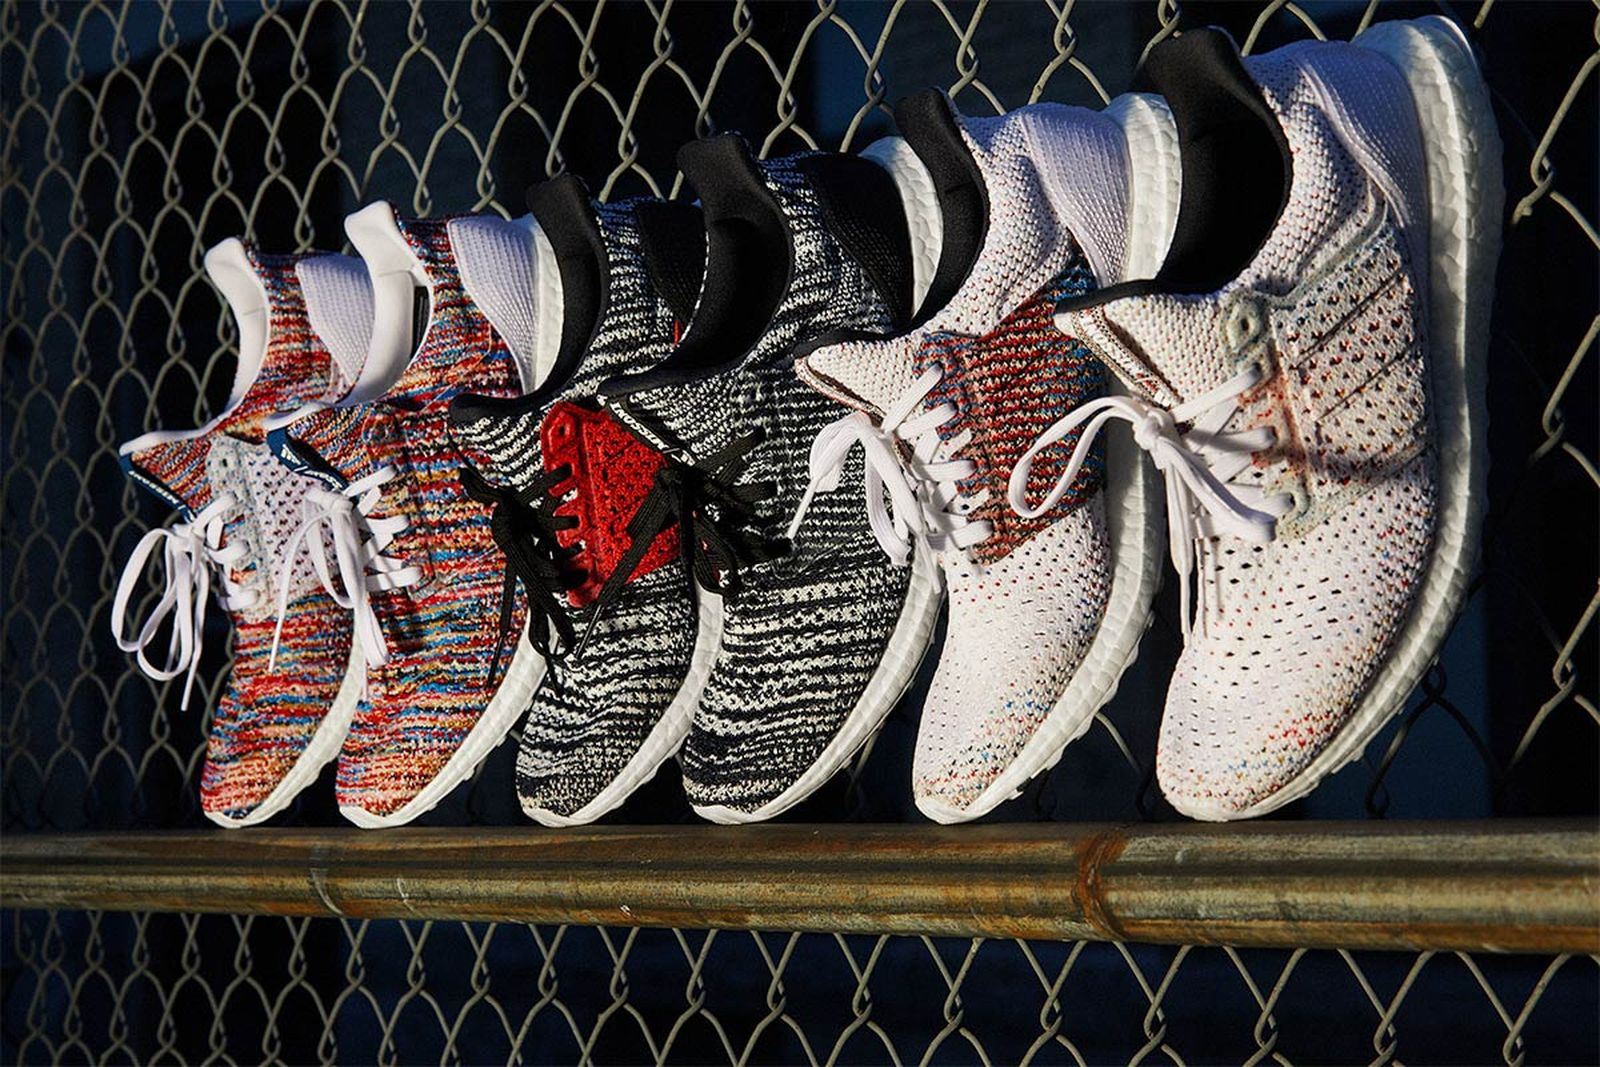 Specialist Be satisfied piston Here's How to Cop adidas x Missoni's Space-Dyed Ultraboosts